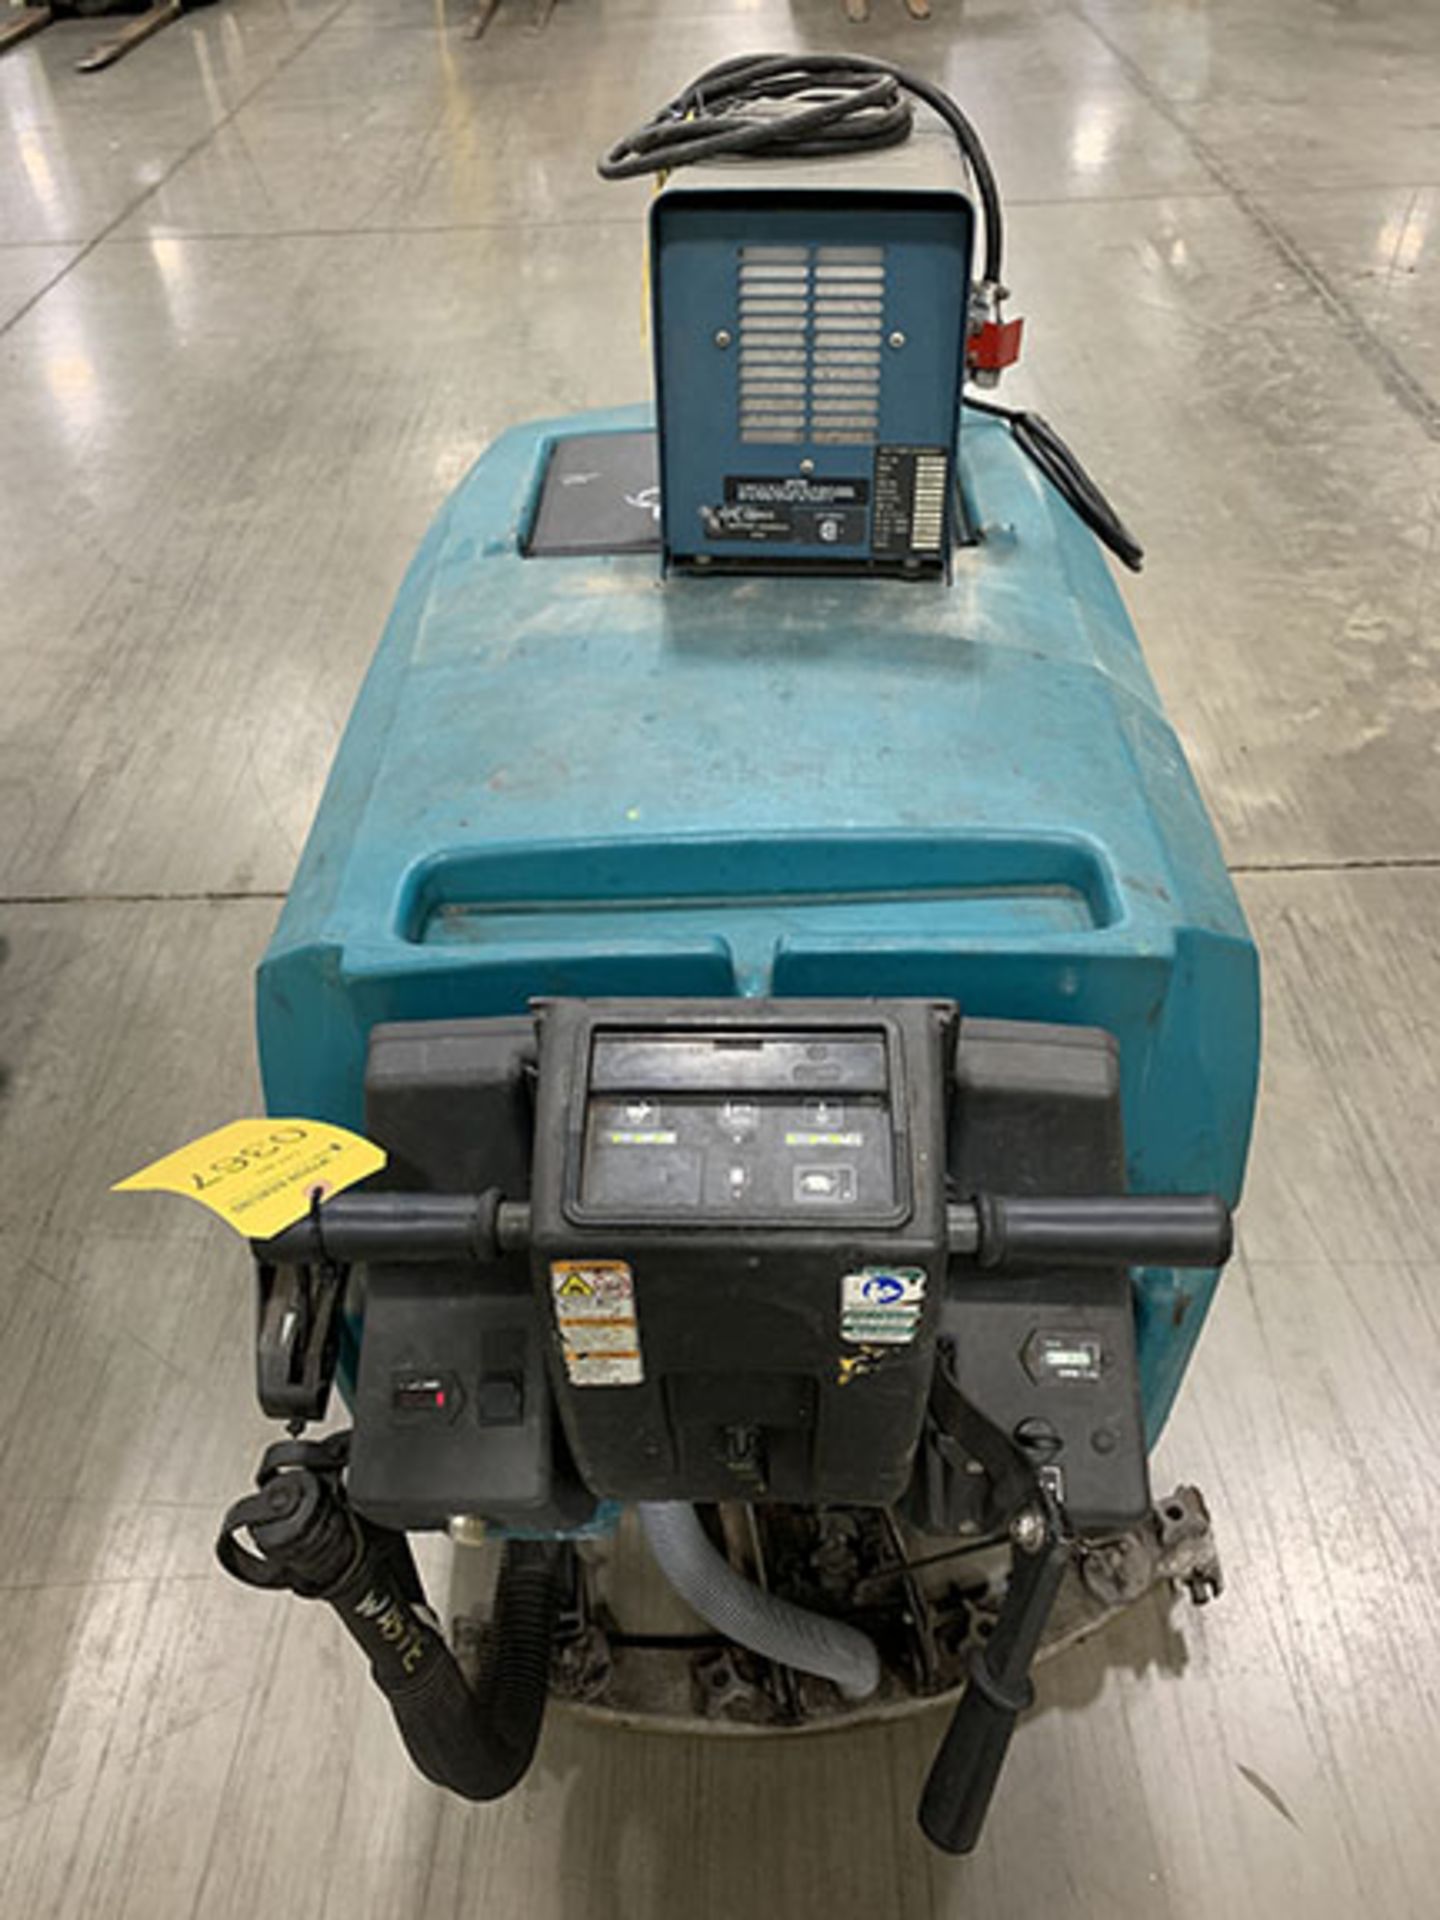 TENNANT FLOOR SWEEPER WITH CHARGER, S/N 3560 - Image 2 of 8